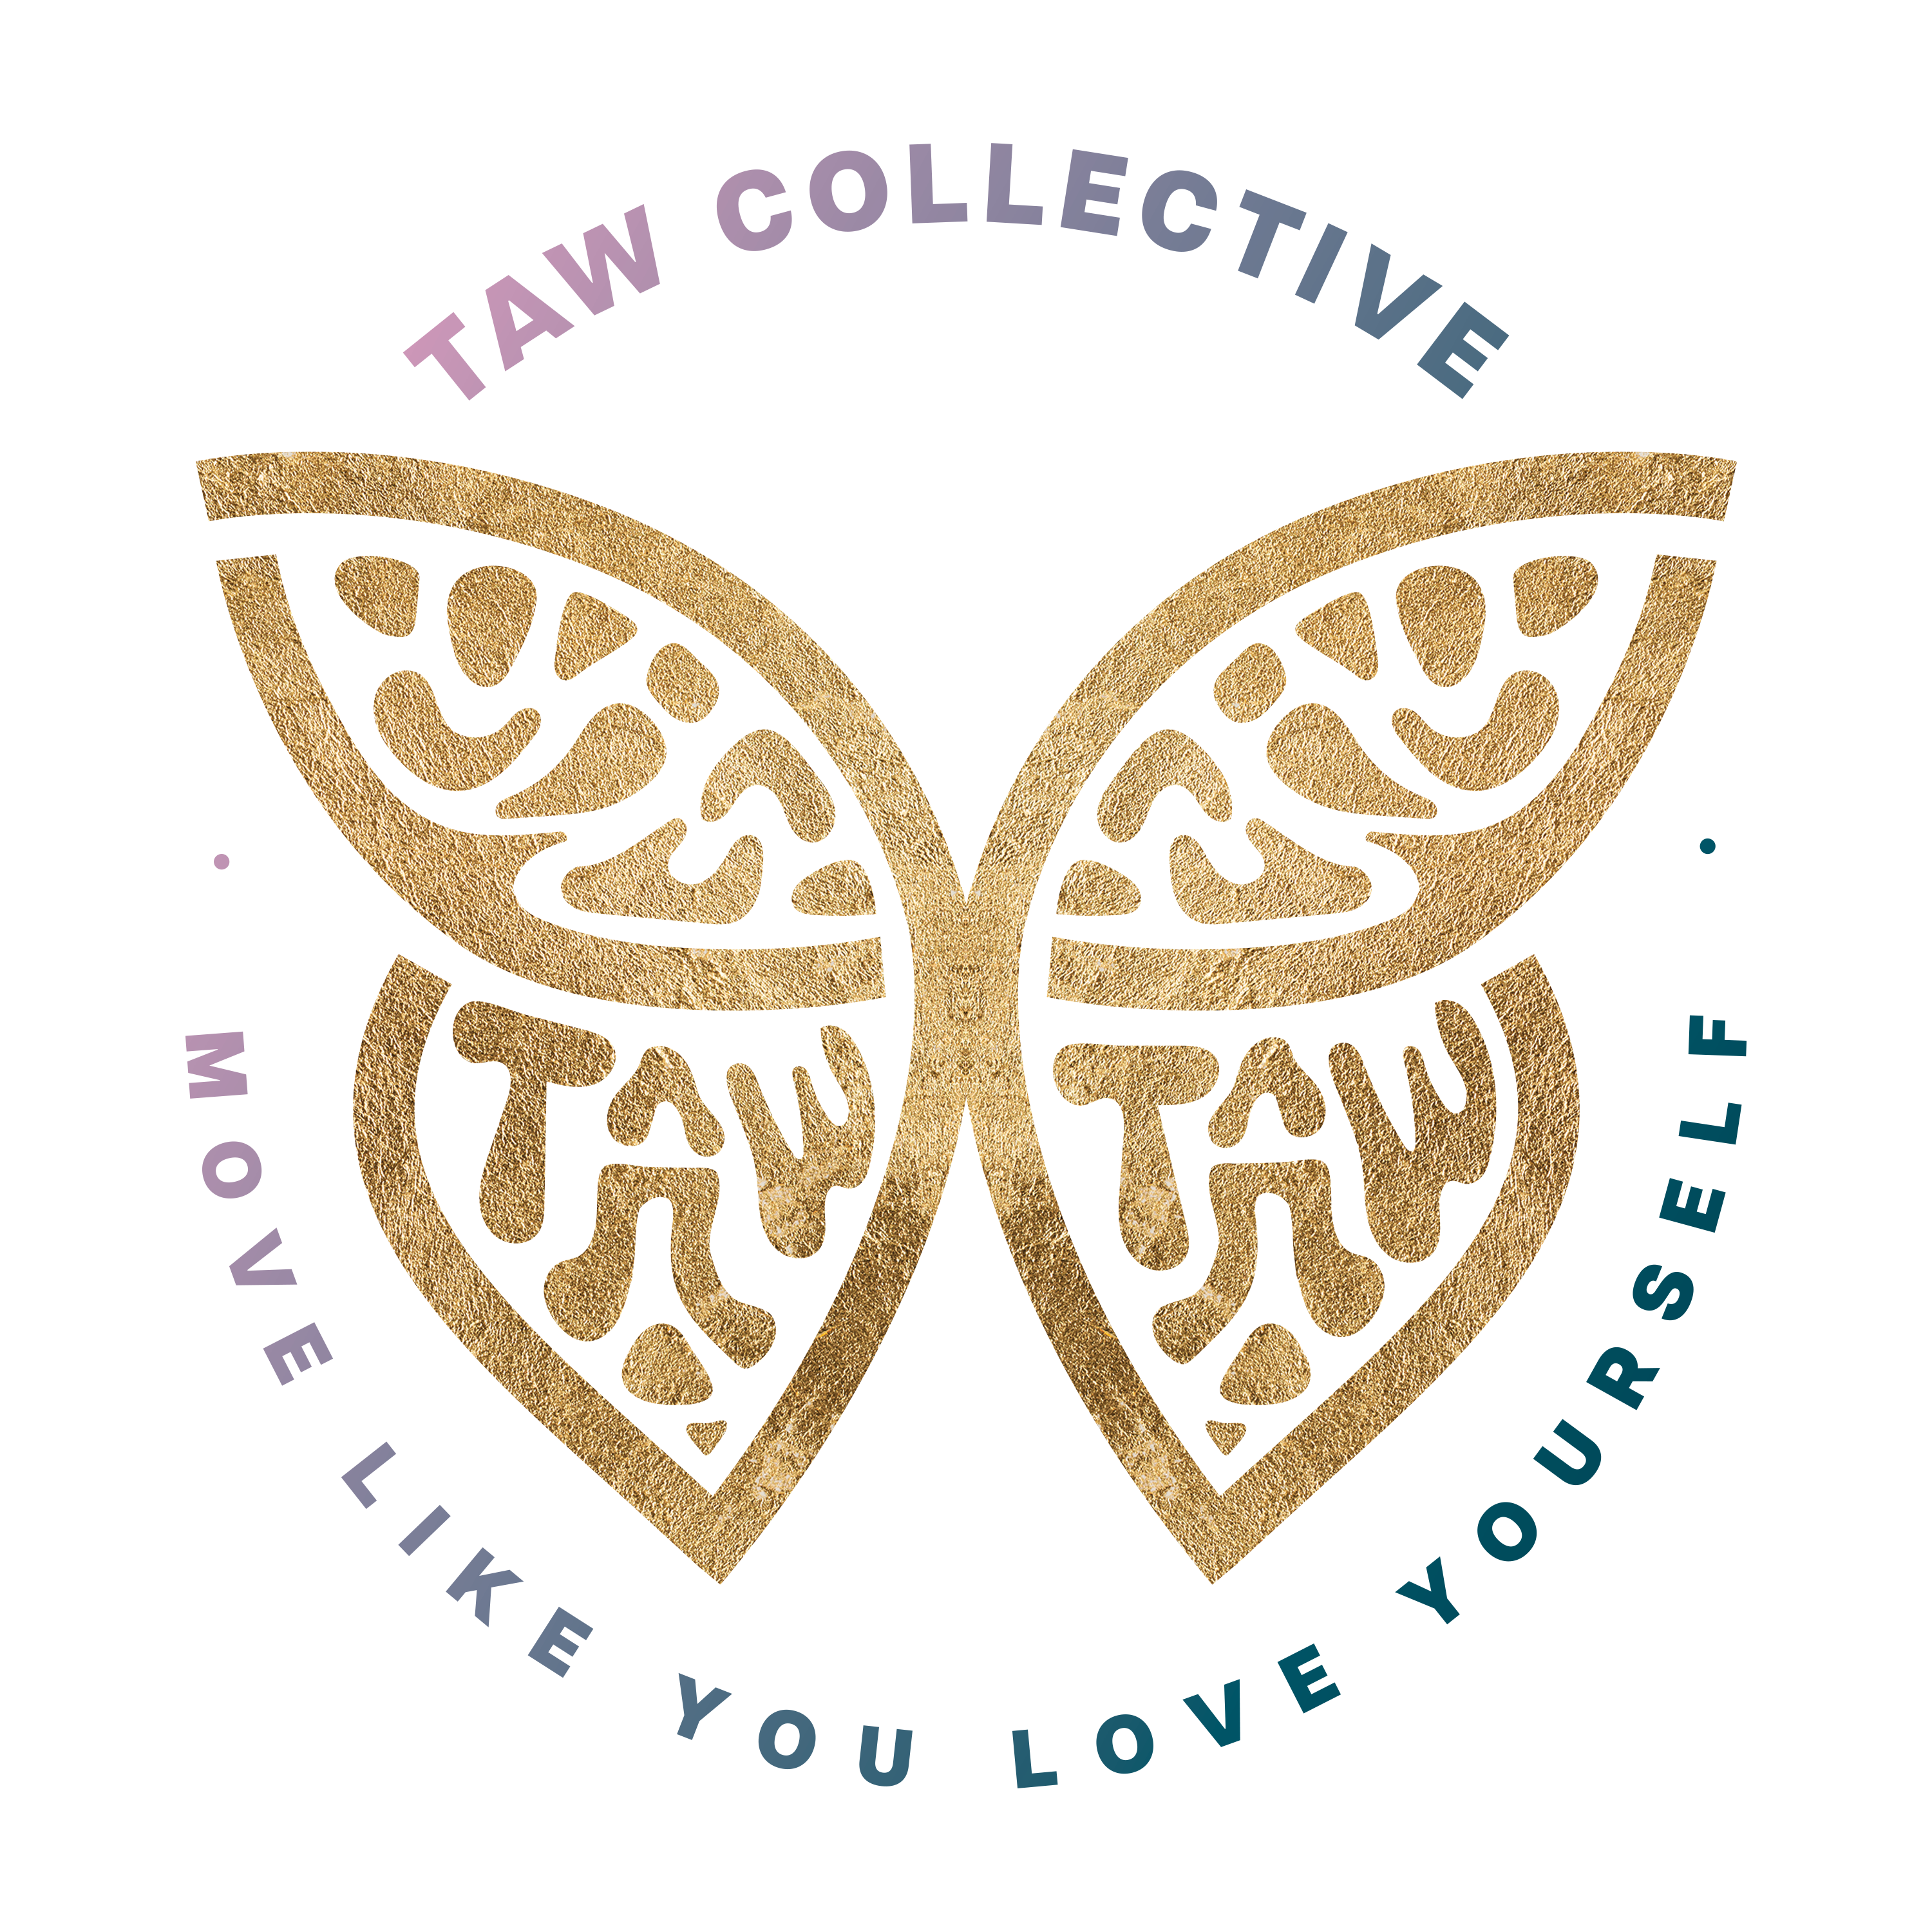 Taw Collective